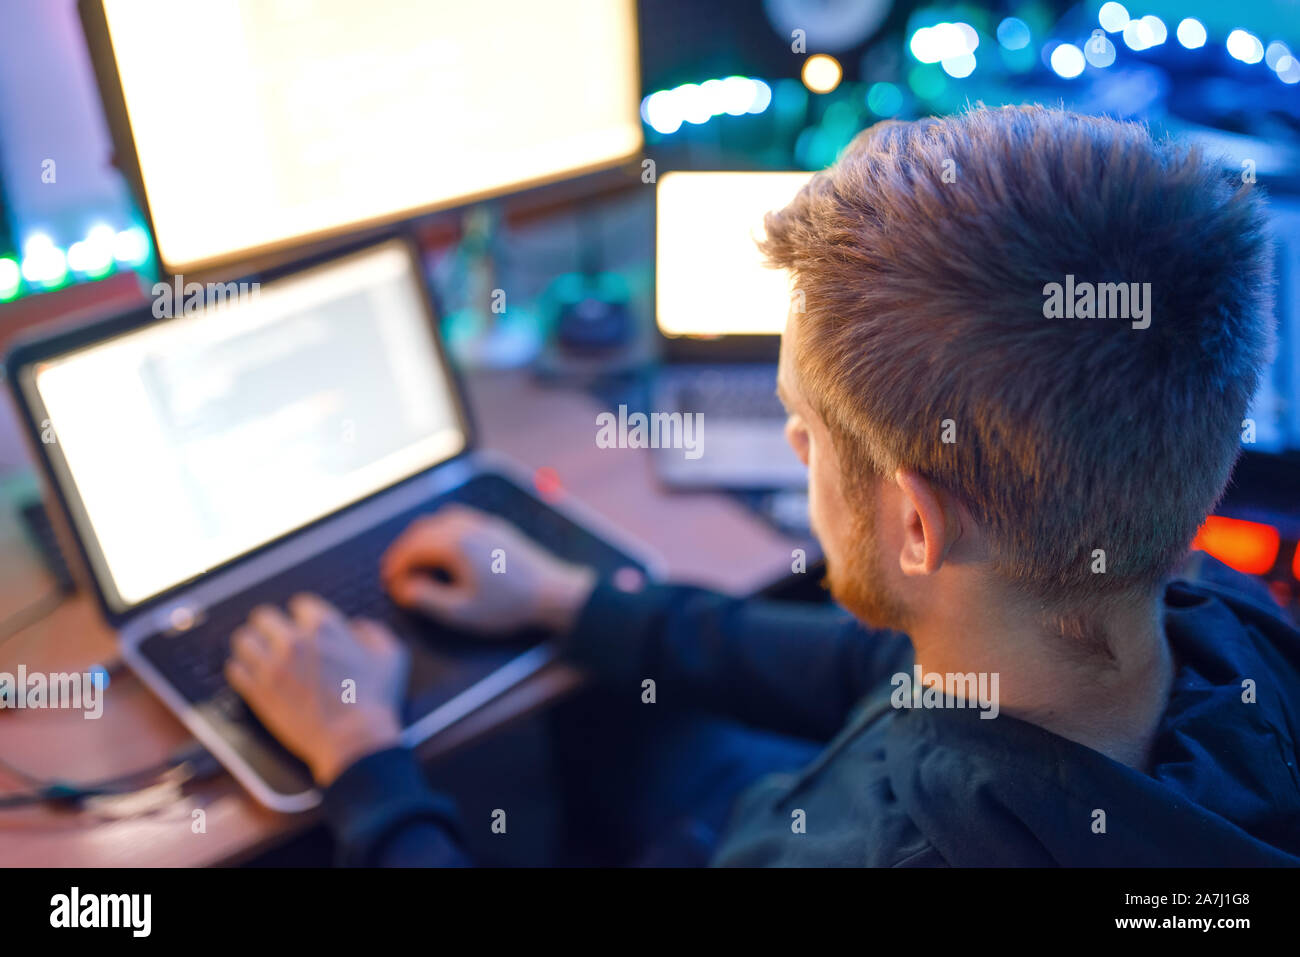 Programmer using laptop and PC, information coding Stock Photo